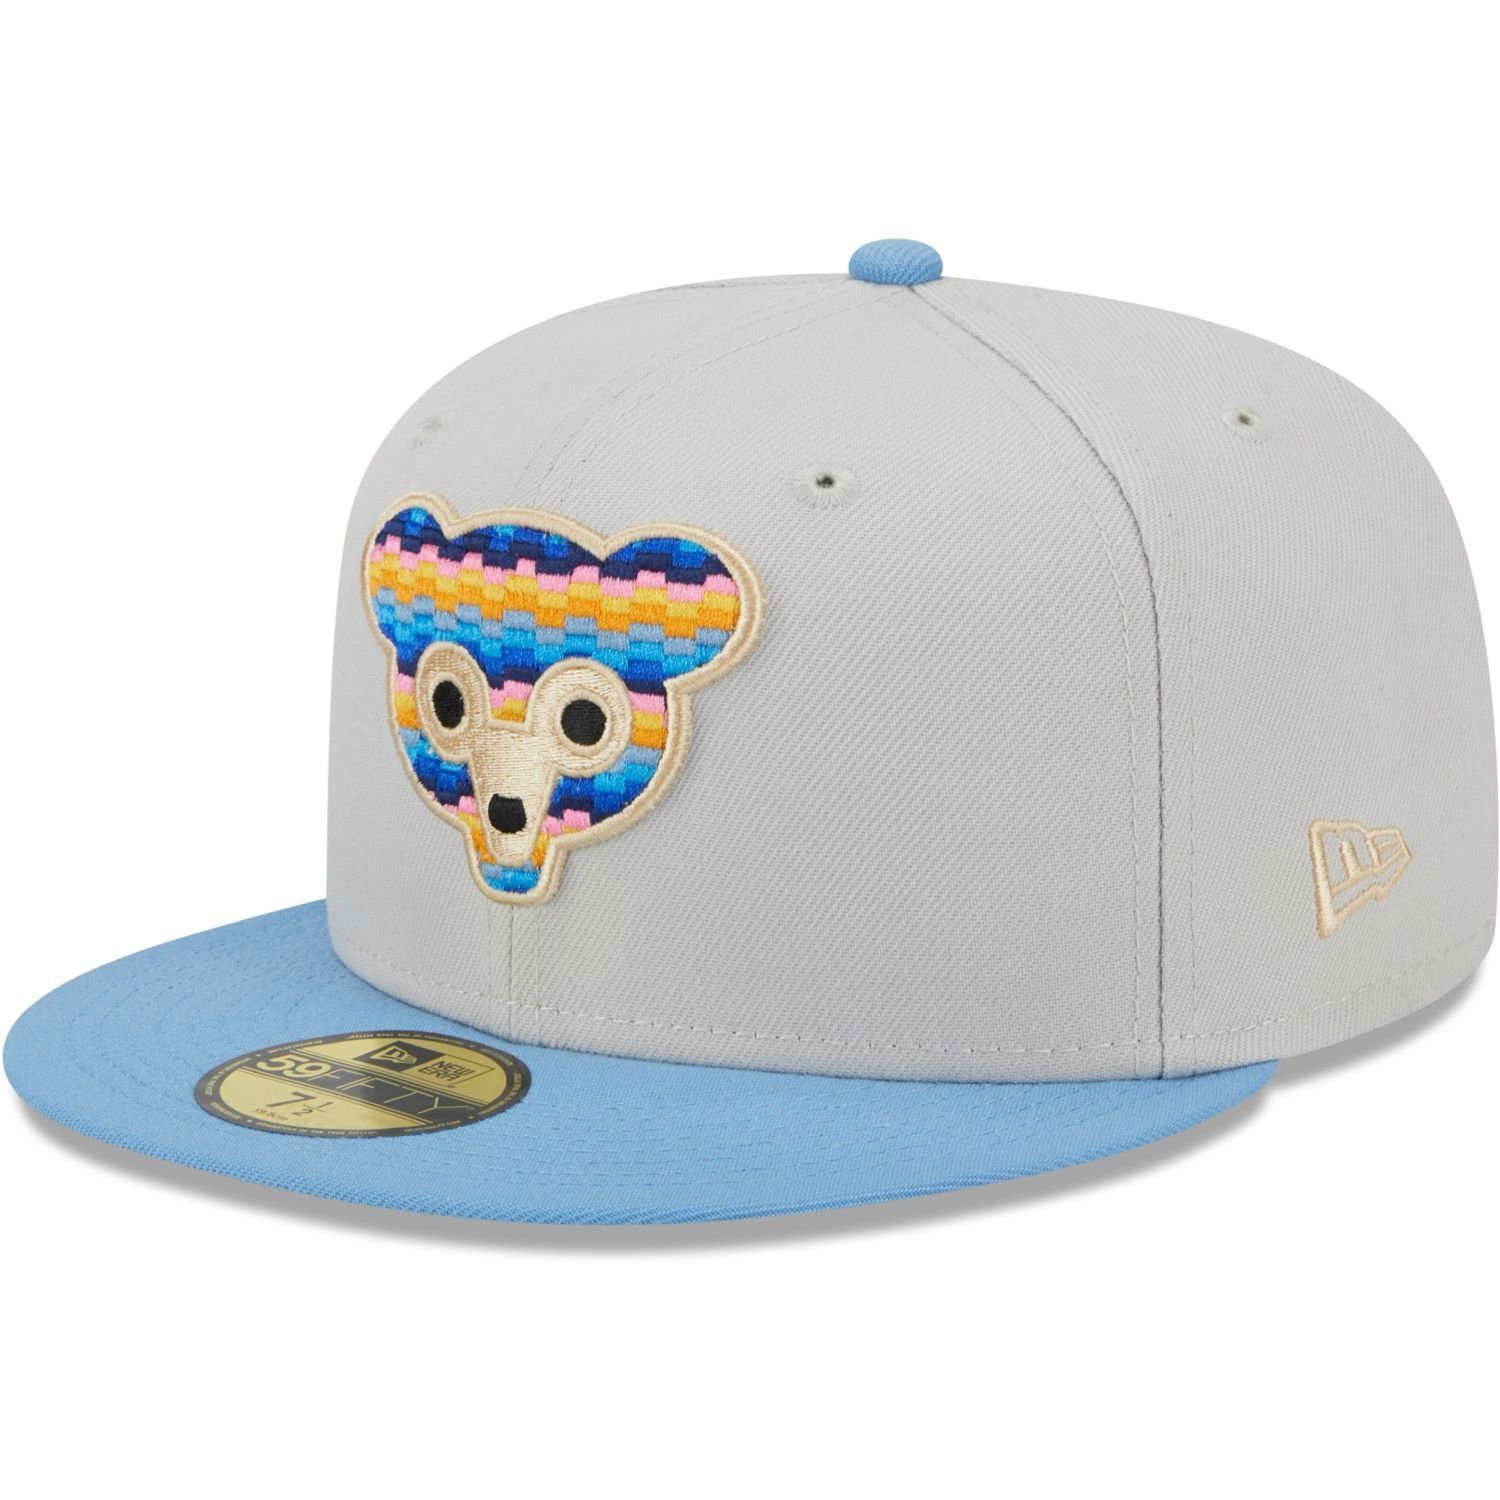 Era Fitted New Chicago Cap Cubs BEACHFRONT 59Fifty